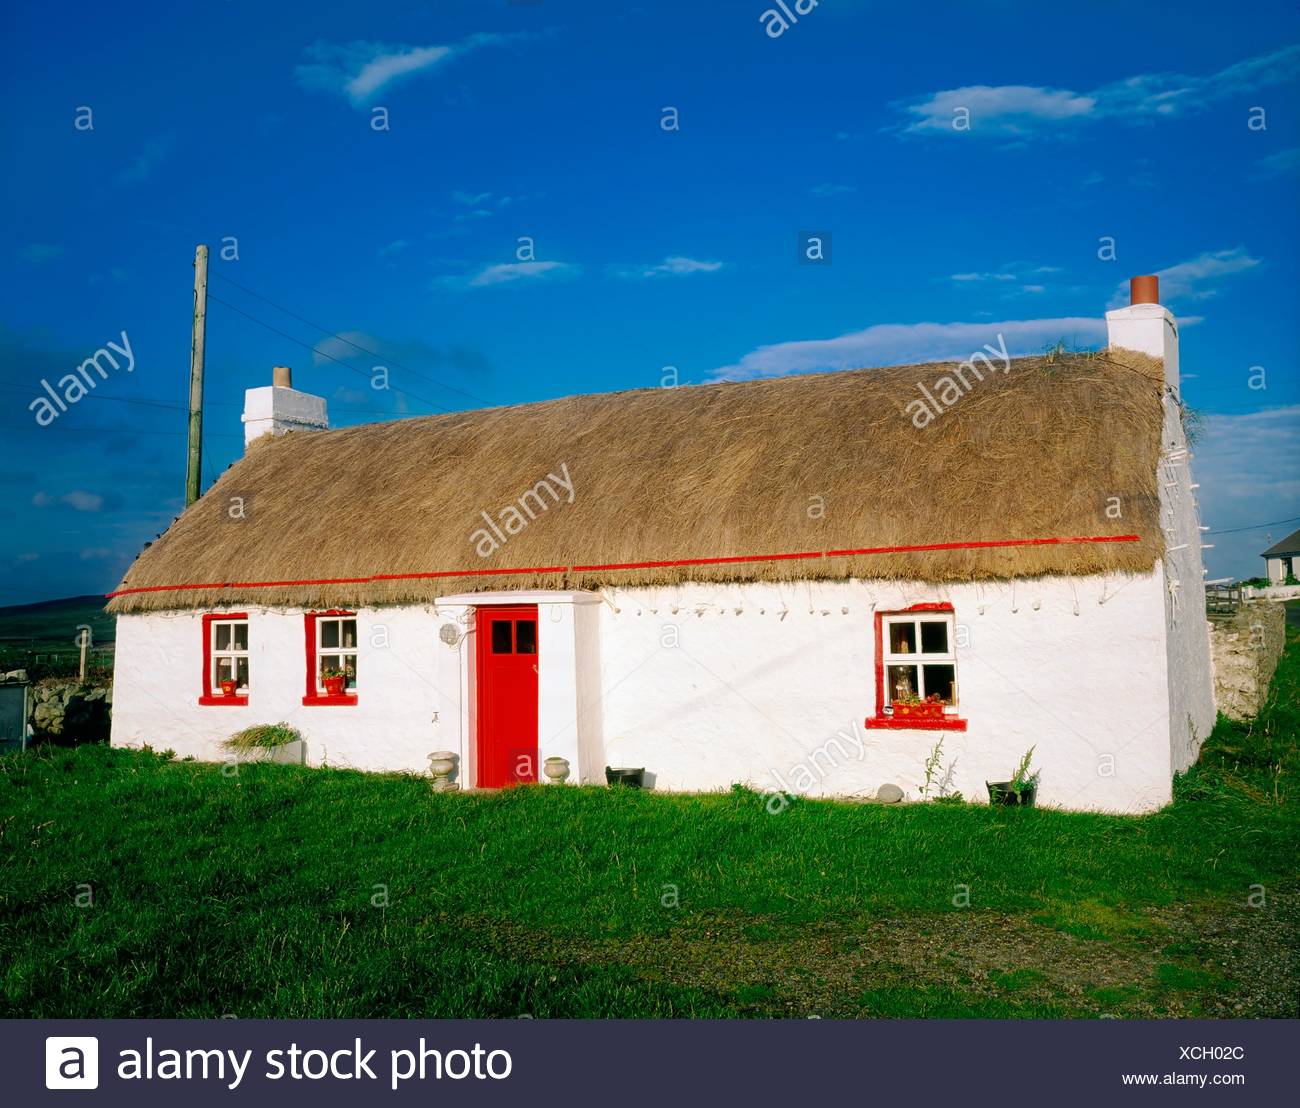 Thatched Cottage Malin Head Inishowen Peninsula Co Donegal